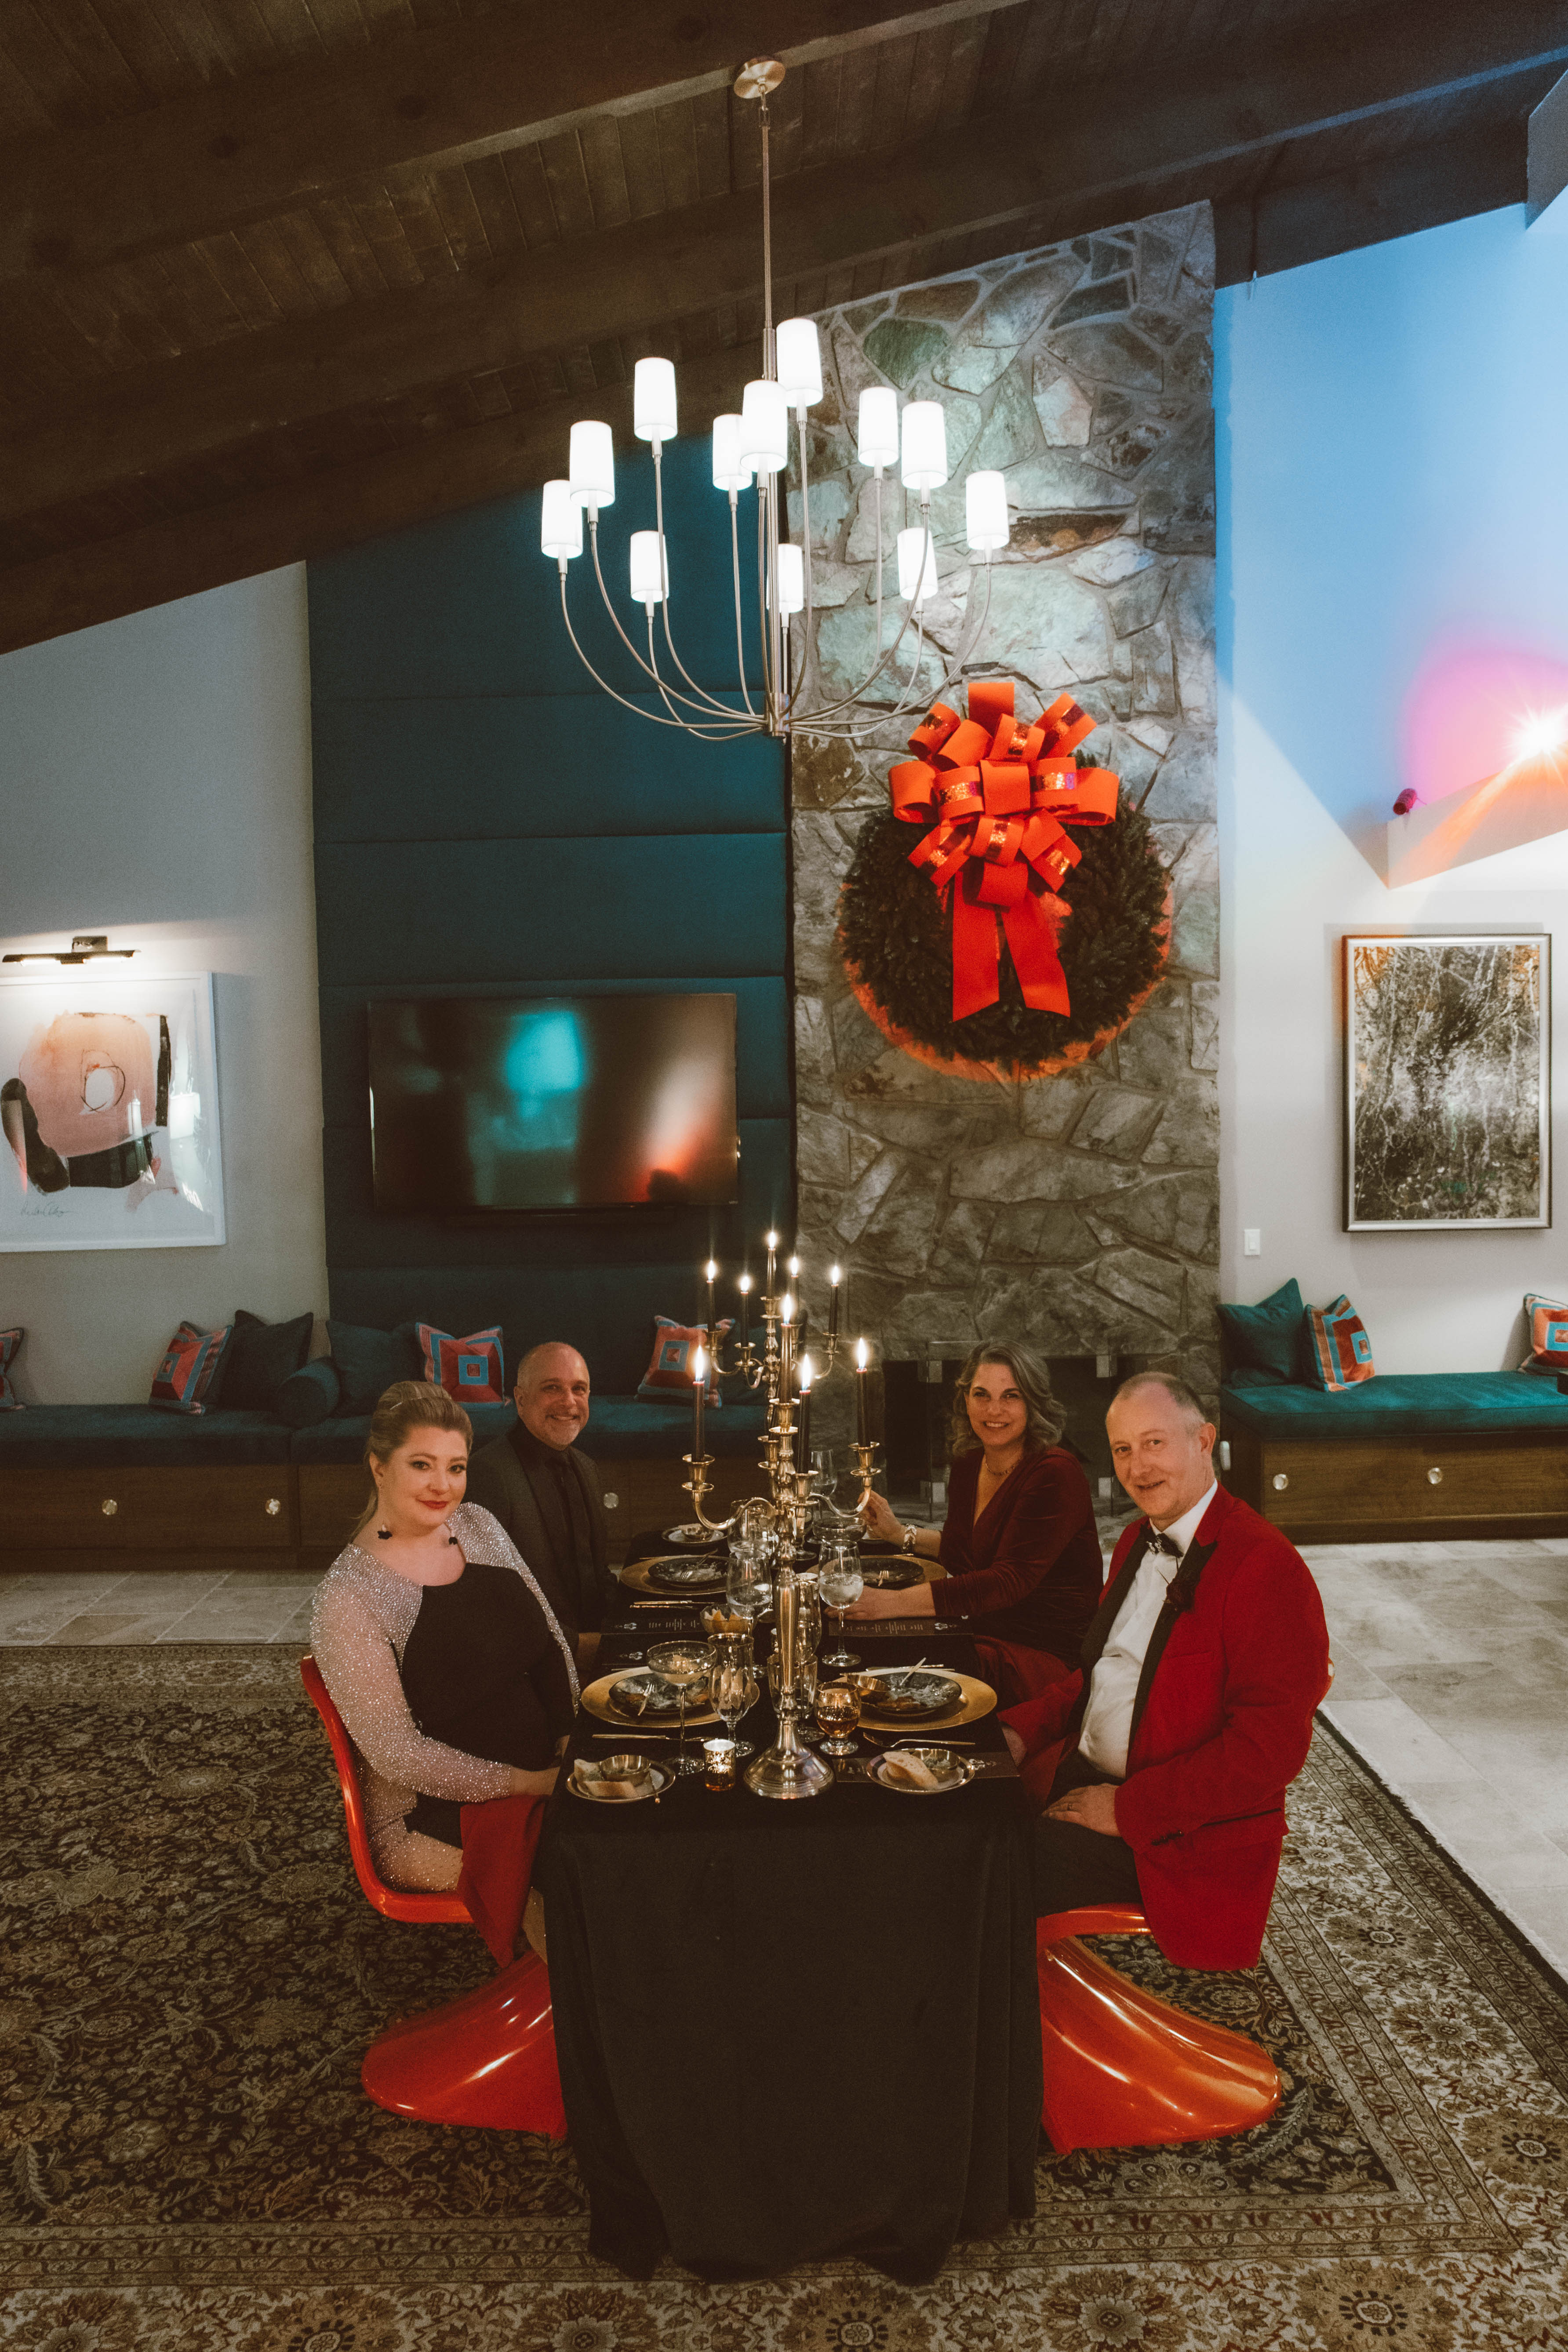 A photo of plated dinner with four guests at intimate las vegas elopement in december. Everything is christmas themed in gold, red, black.